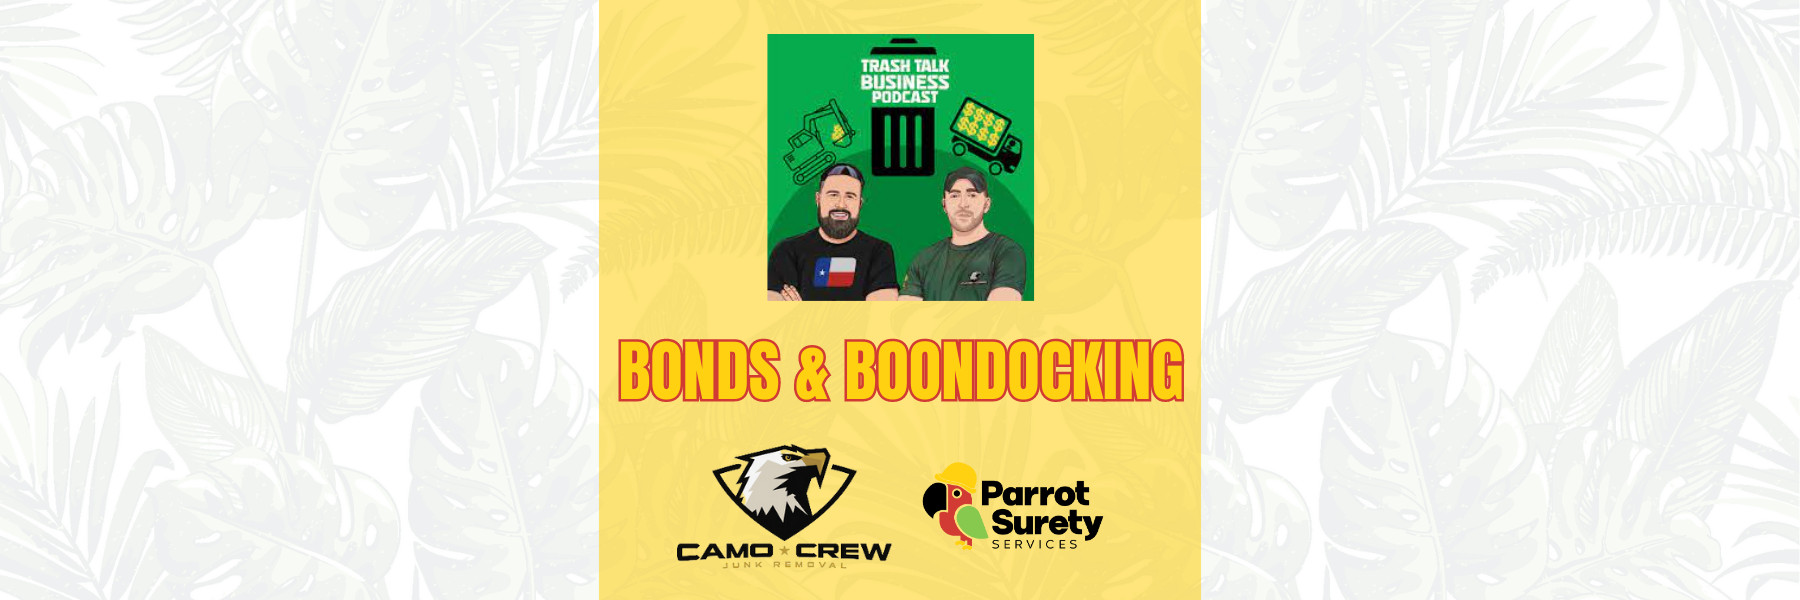 Bonds and boondocking trash talk business podcast with camo crew junk removal cover image